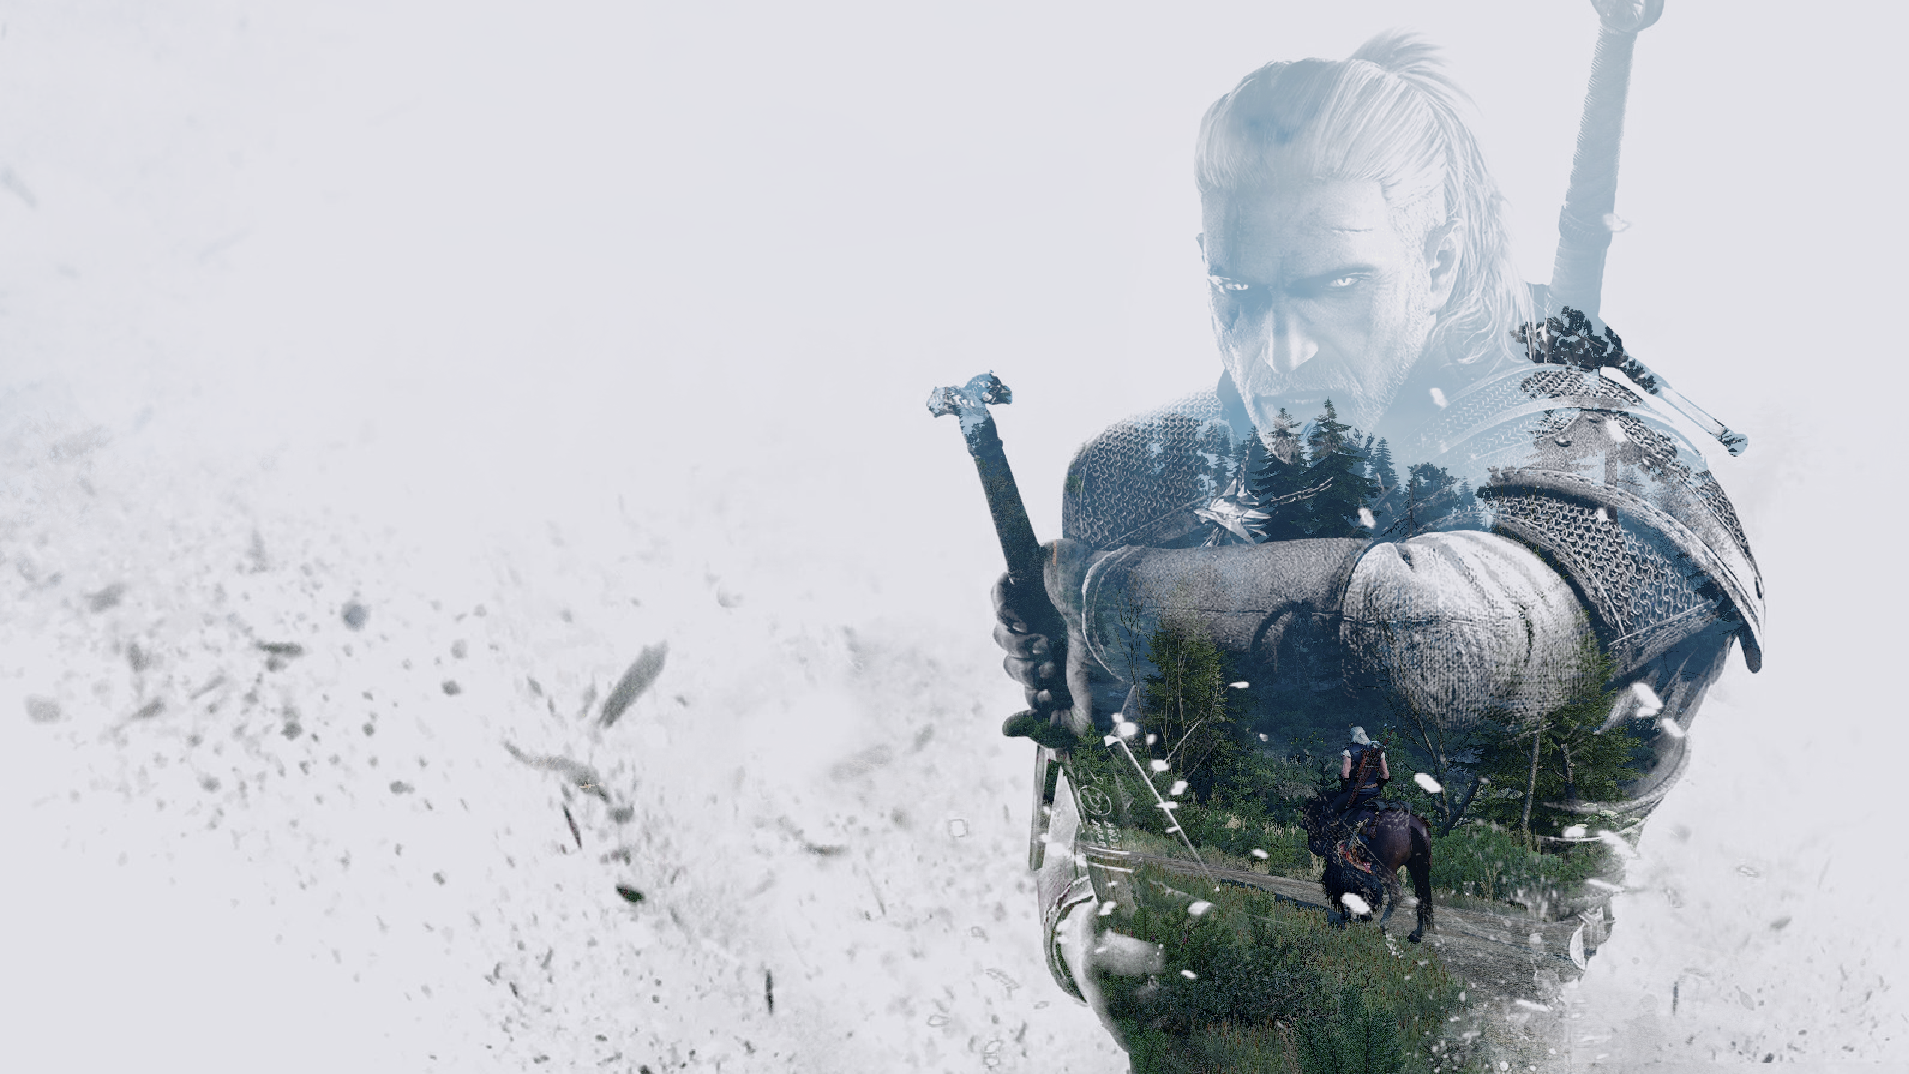 General 1909x1074 Geralt of Rivia The Witcher 3: Wild Hunt The Witcher video games video game characters CD Projekt RED